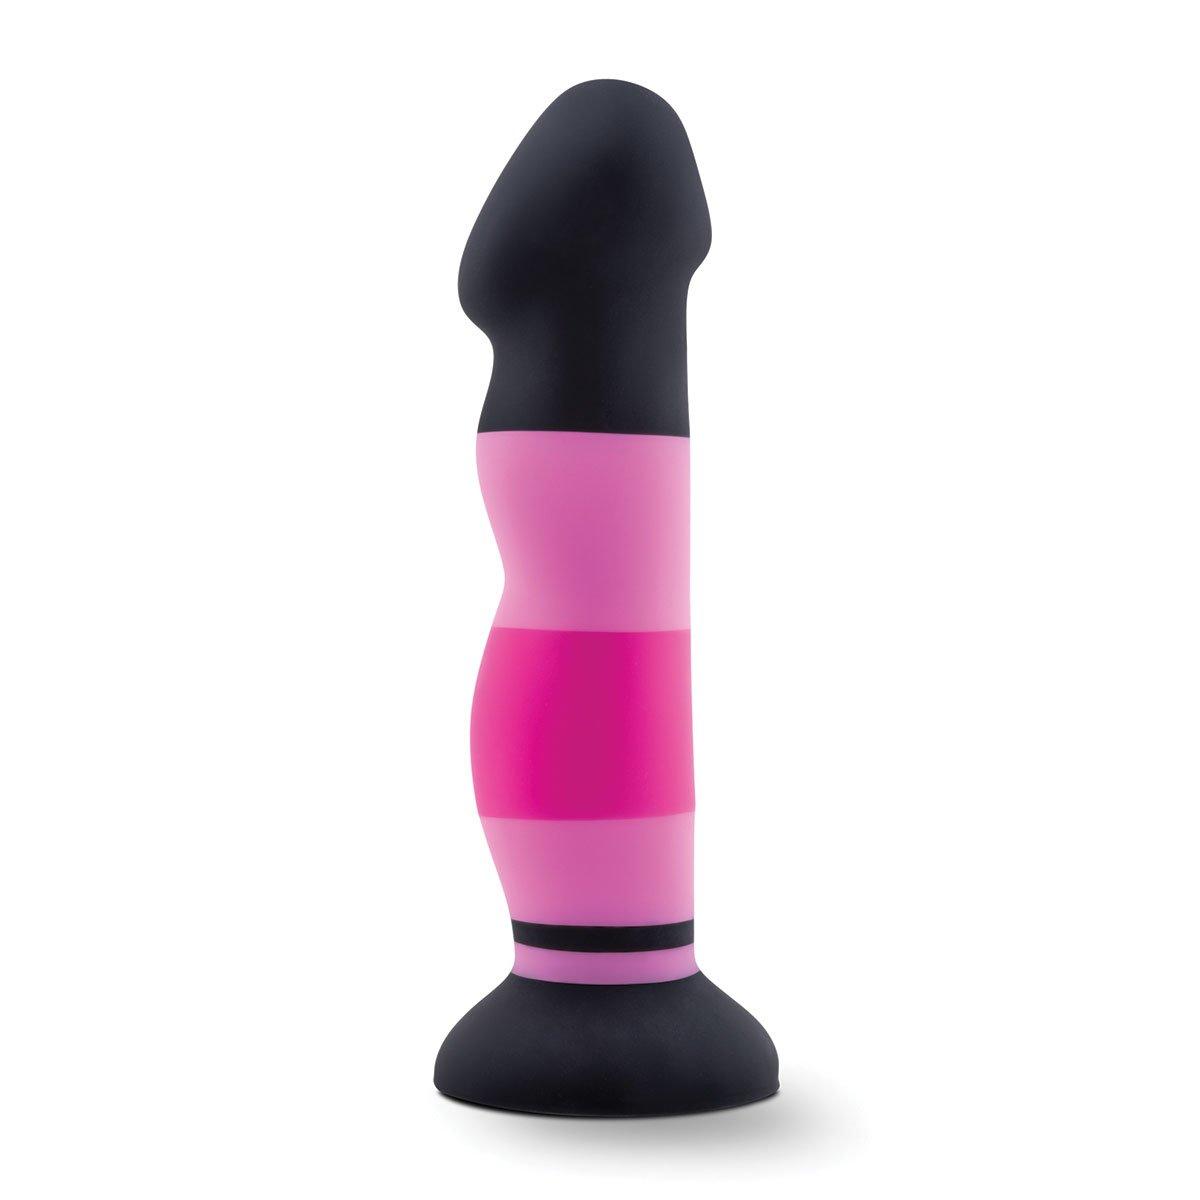 Avant D4 Sexy In Pink - Buy At Luxury Toy X - Free 3-Day Shipping